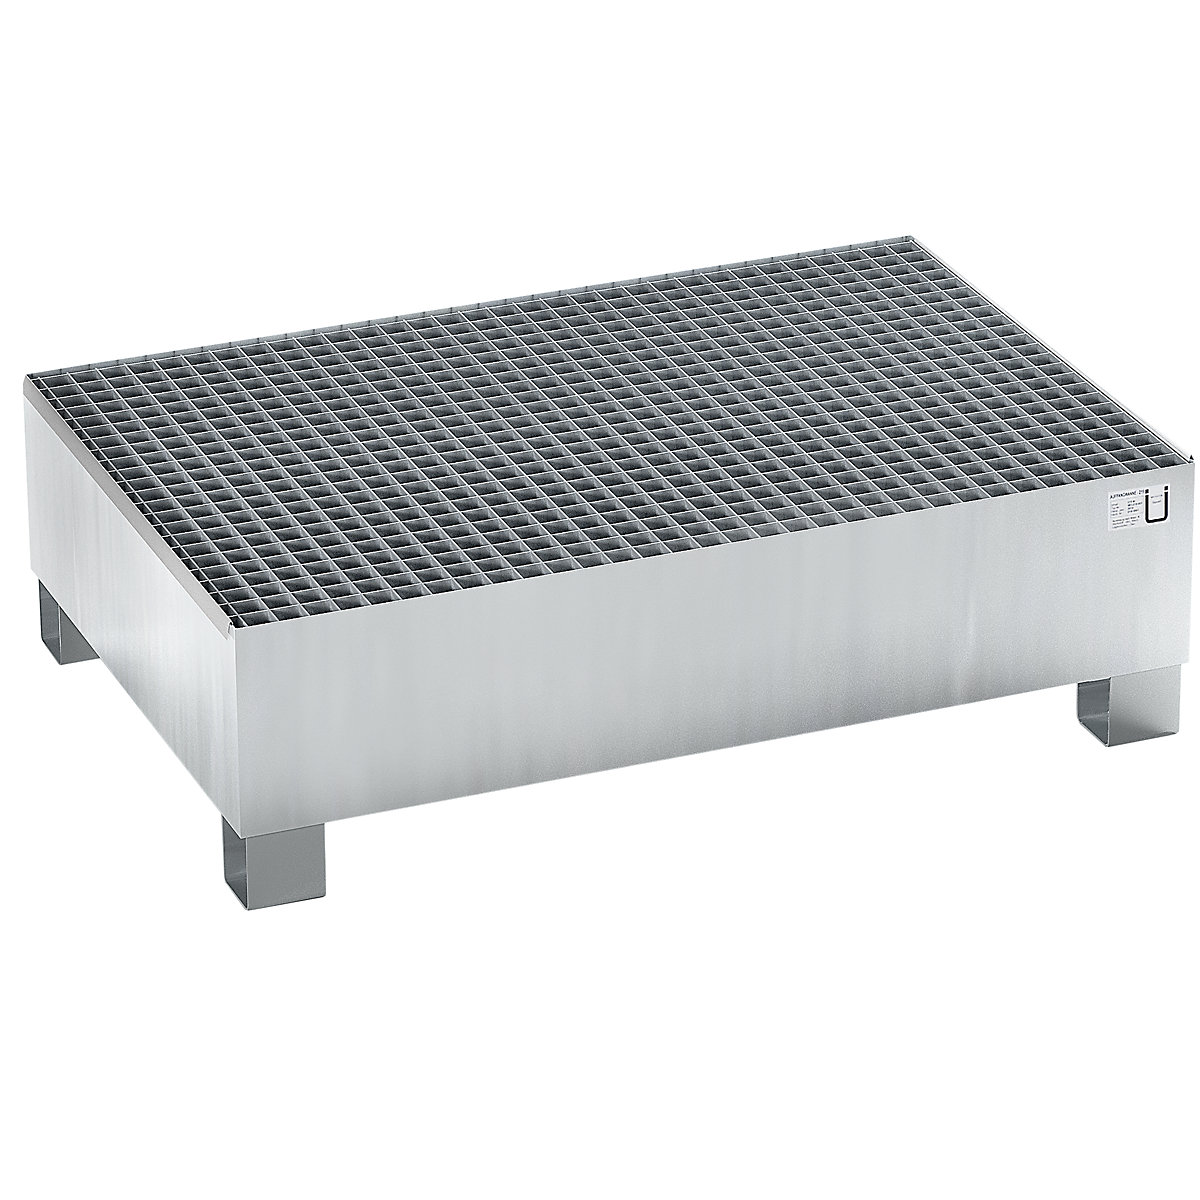 Steel sump tray for 200 l drums – eurokraft basic, LxWxH 1200 x 800 x 360 mm, with certification, hot dip galvanised, with grate-5